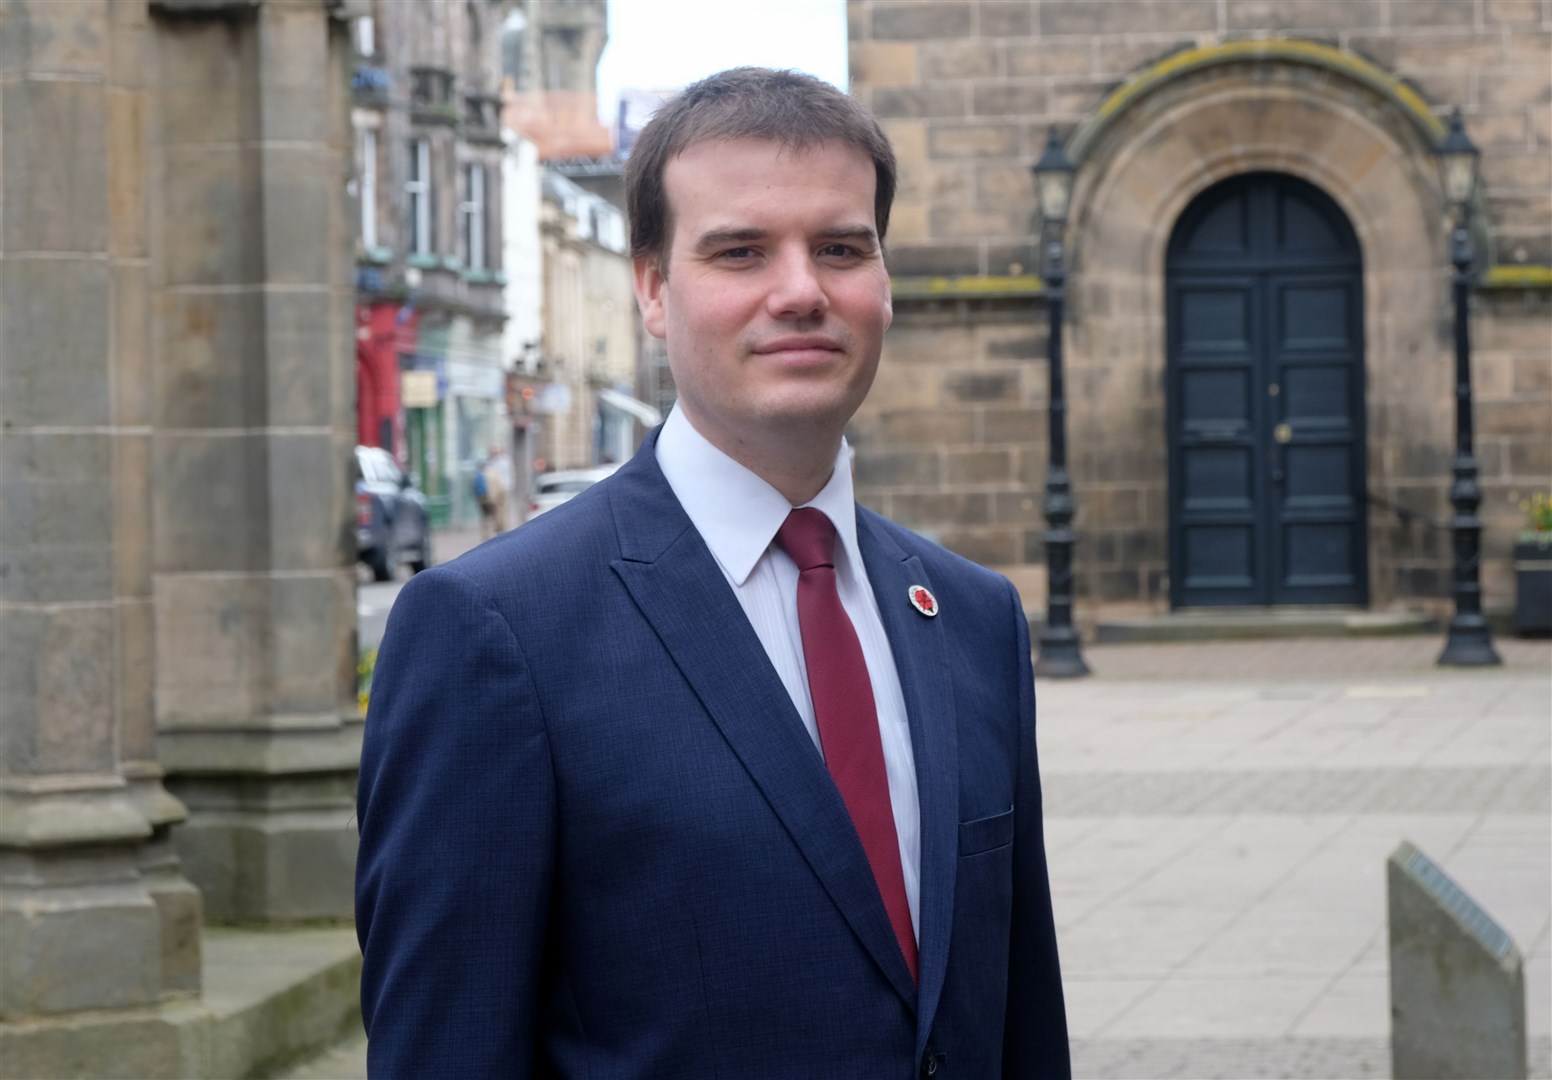 James Hynam has been selected as the Labour candidate for the new seat.